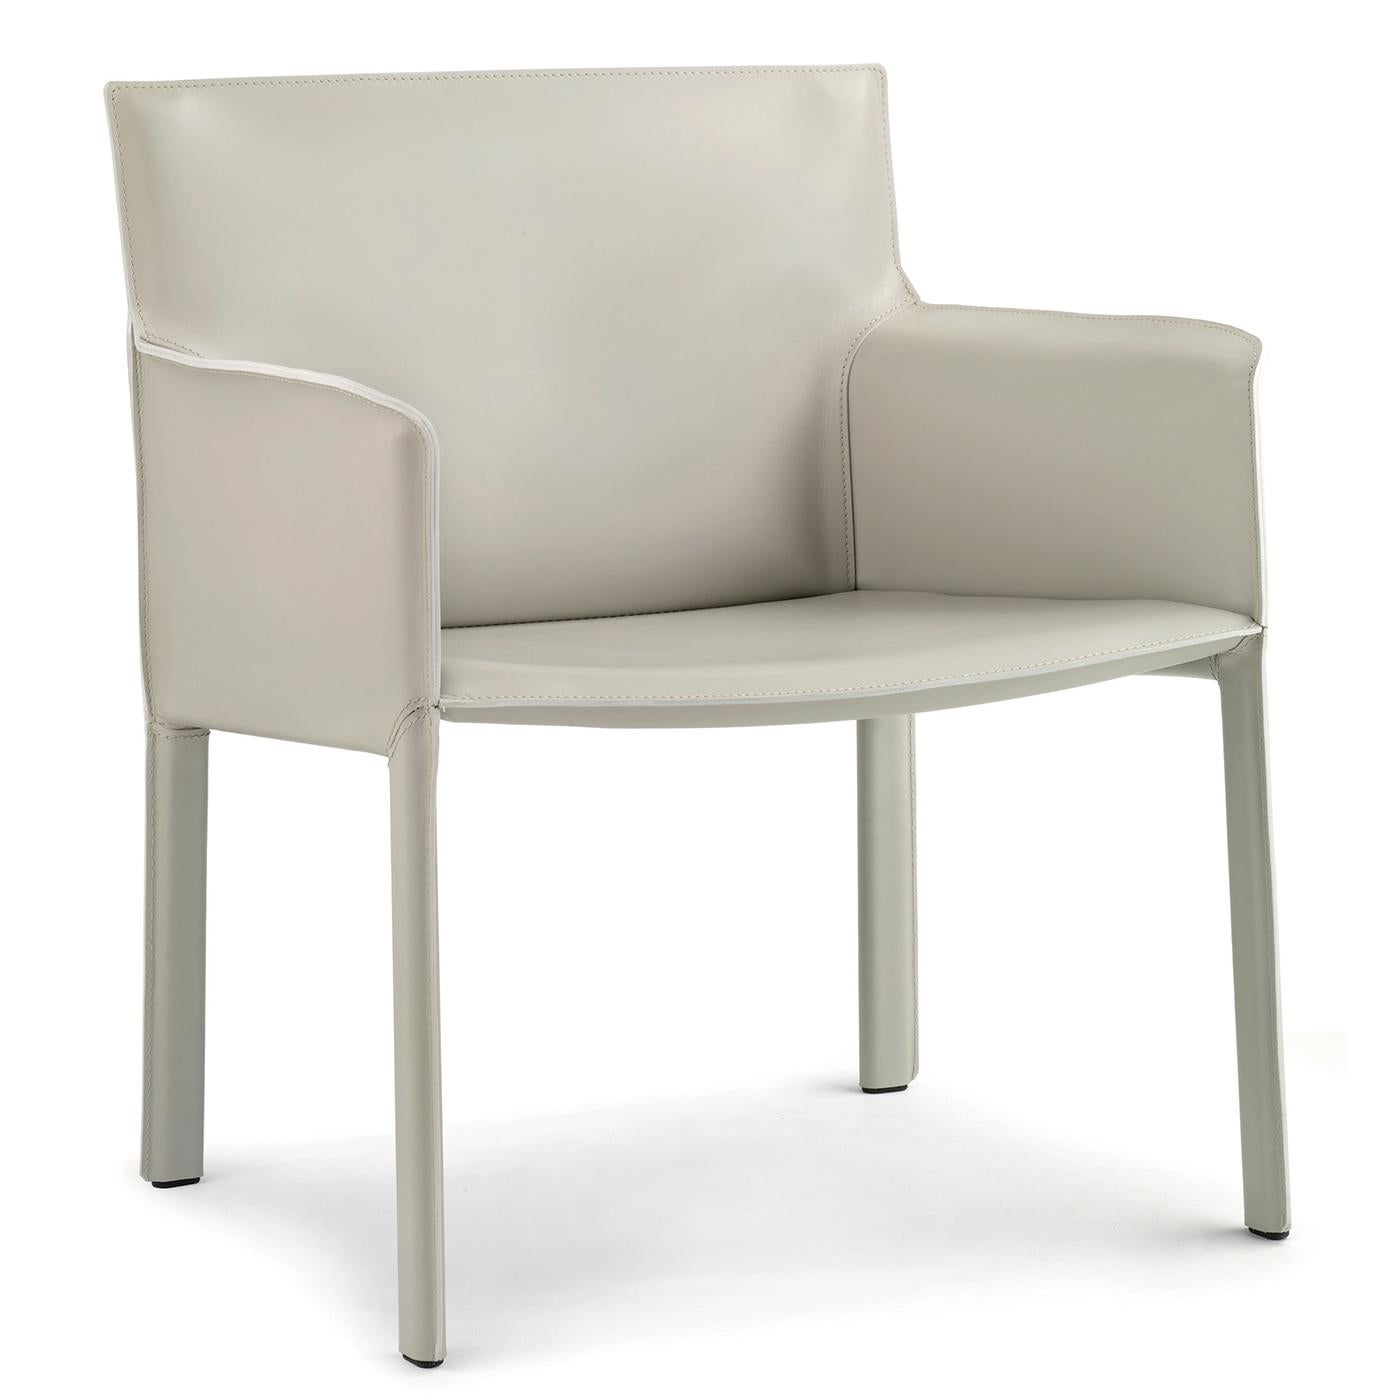 Modern Pasqualina Relax Armchair by Grassi & Bianchi For Sale